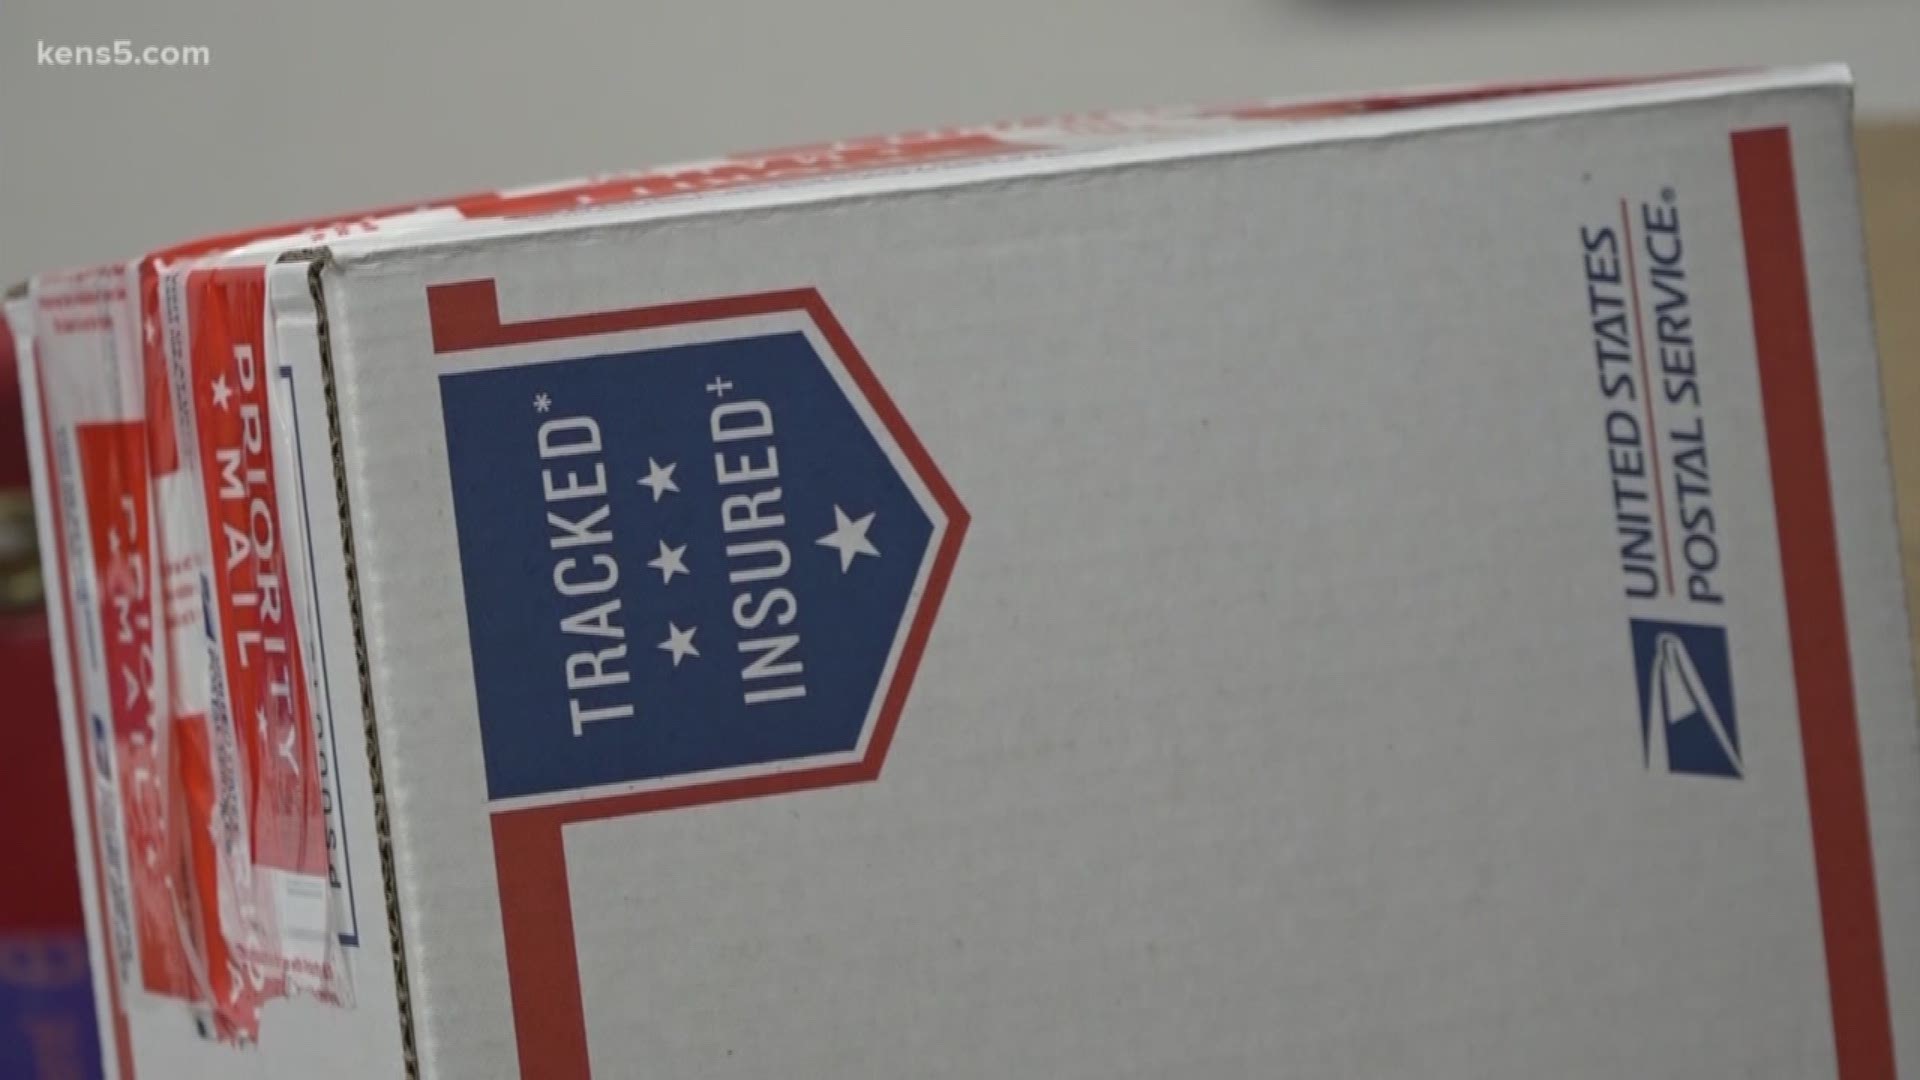 Police agencies across Texas are warning people to inspect packages before picking them up.